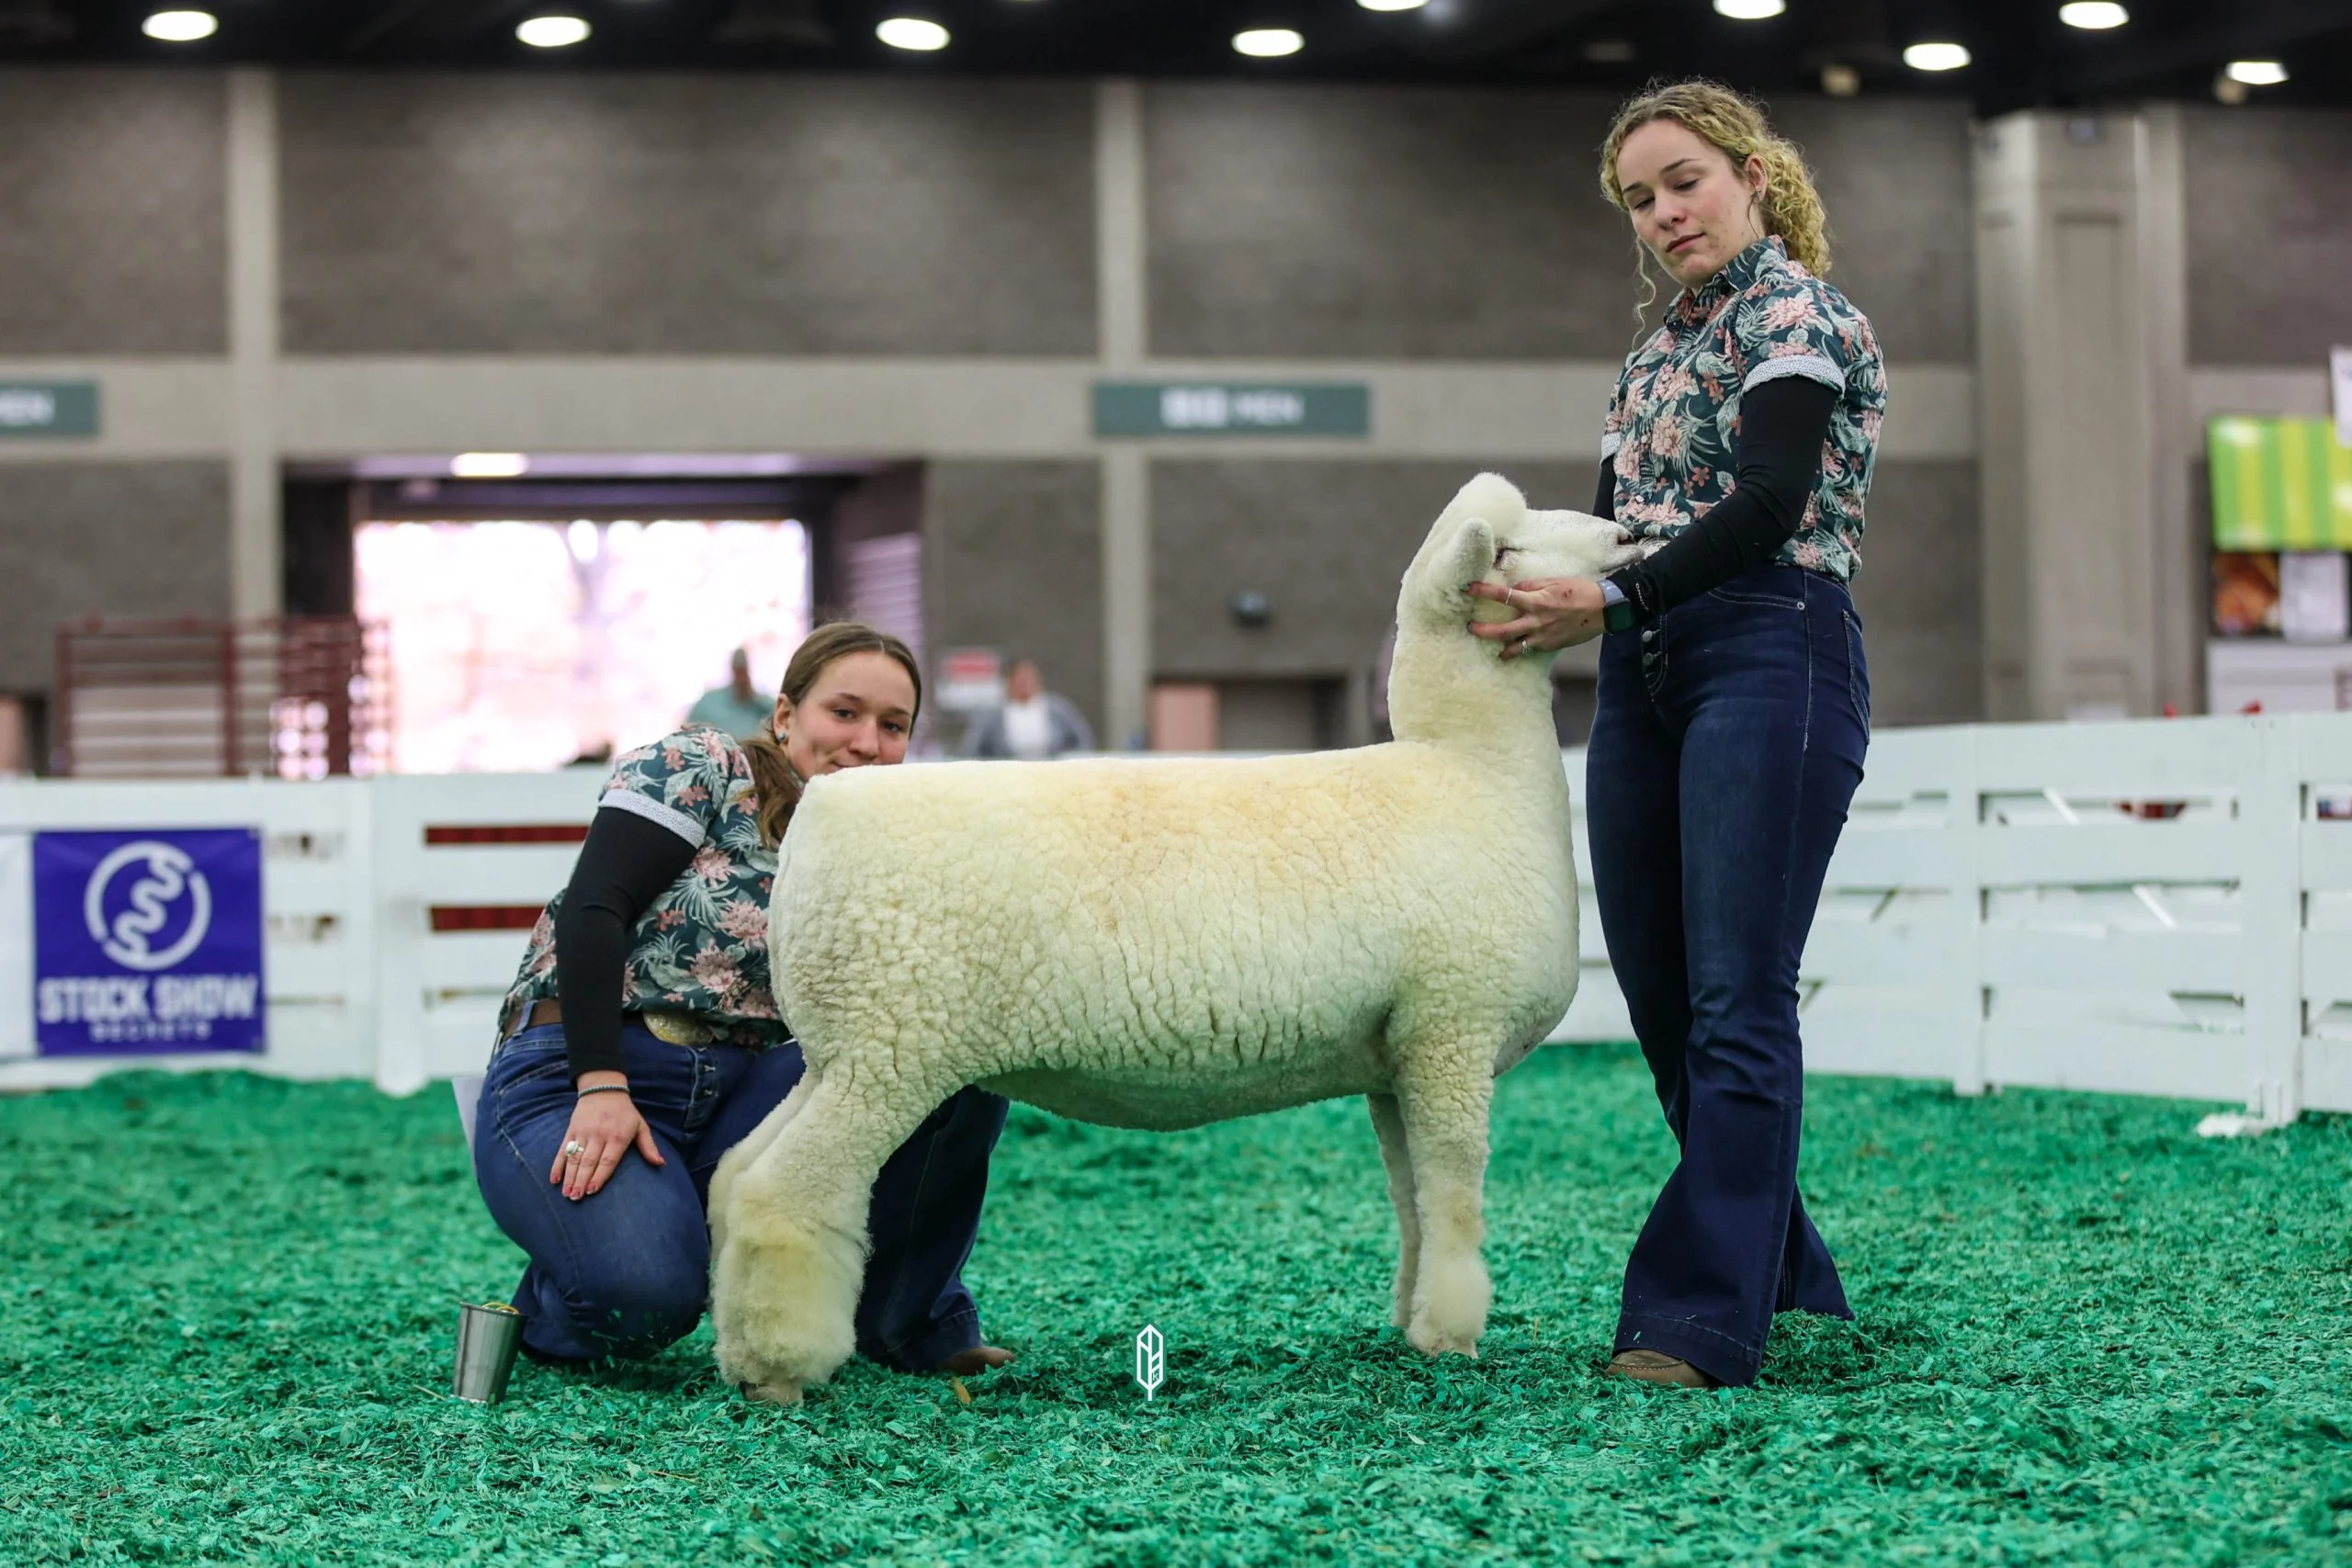 2023 National White Romney Show at NAILE
1st place fall ewe lamb exhibited by Catherine Hromis of Winding Wicks Farm